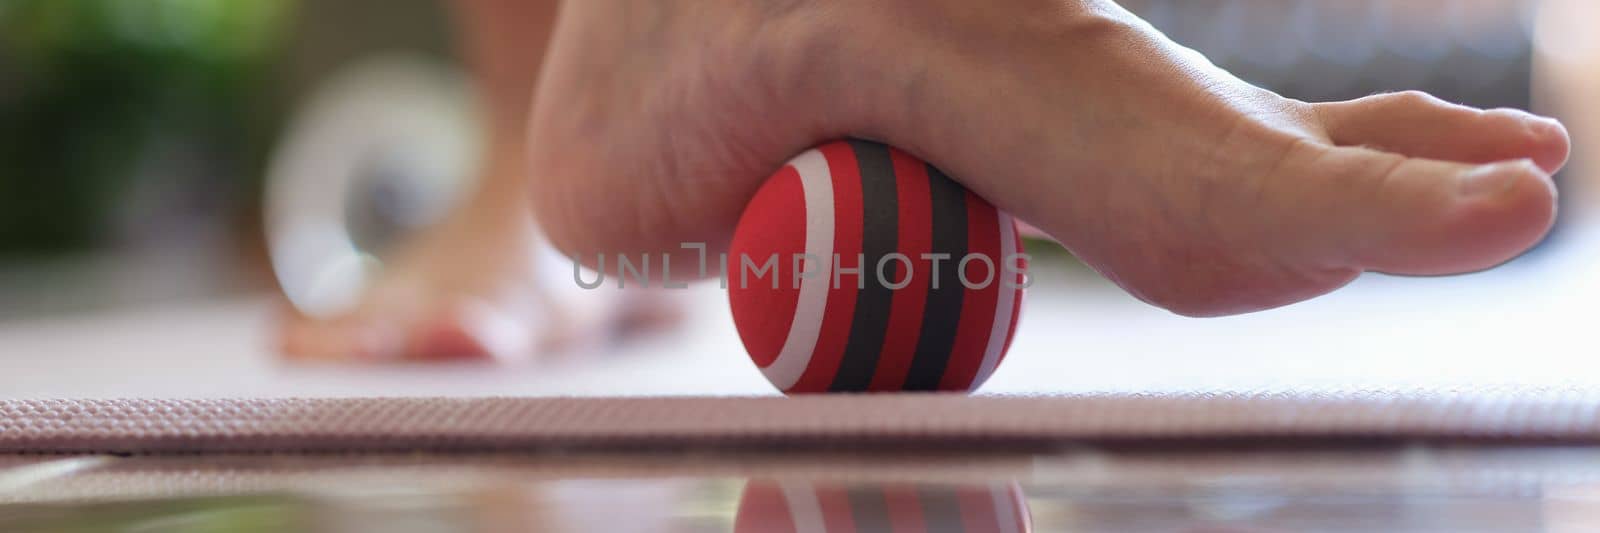 Person rolls ball on foot at home closeup. Foot massage ball concept